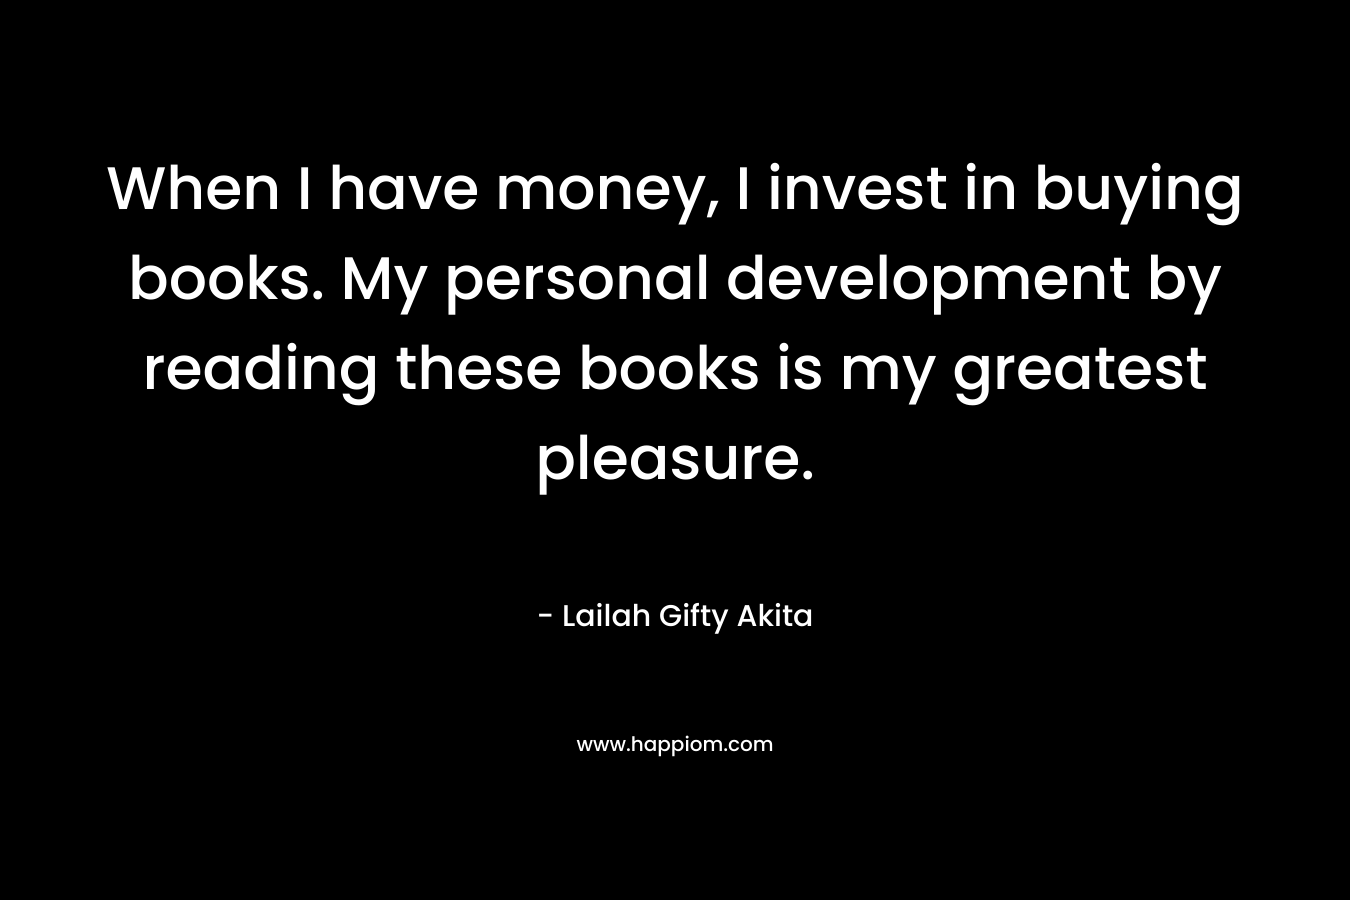 When I have money, I invest in buying books. My personal development by reading these books is my greatest pleasure. – Lailah Gifty Akita